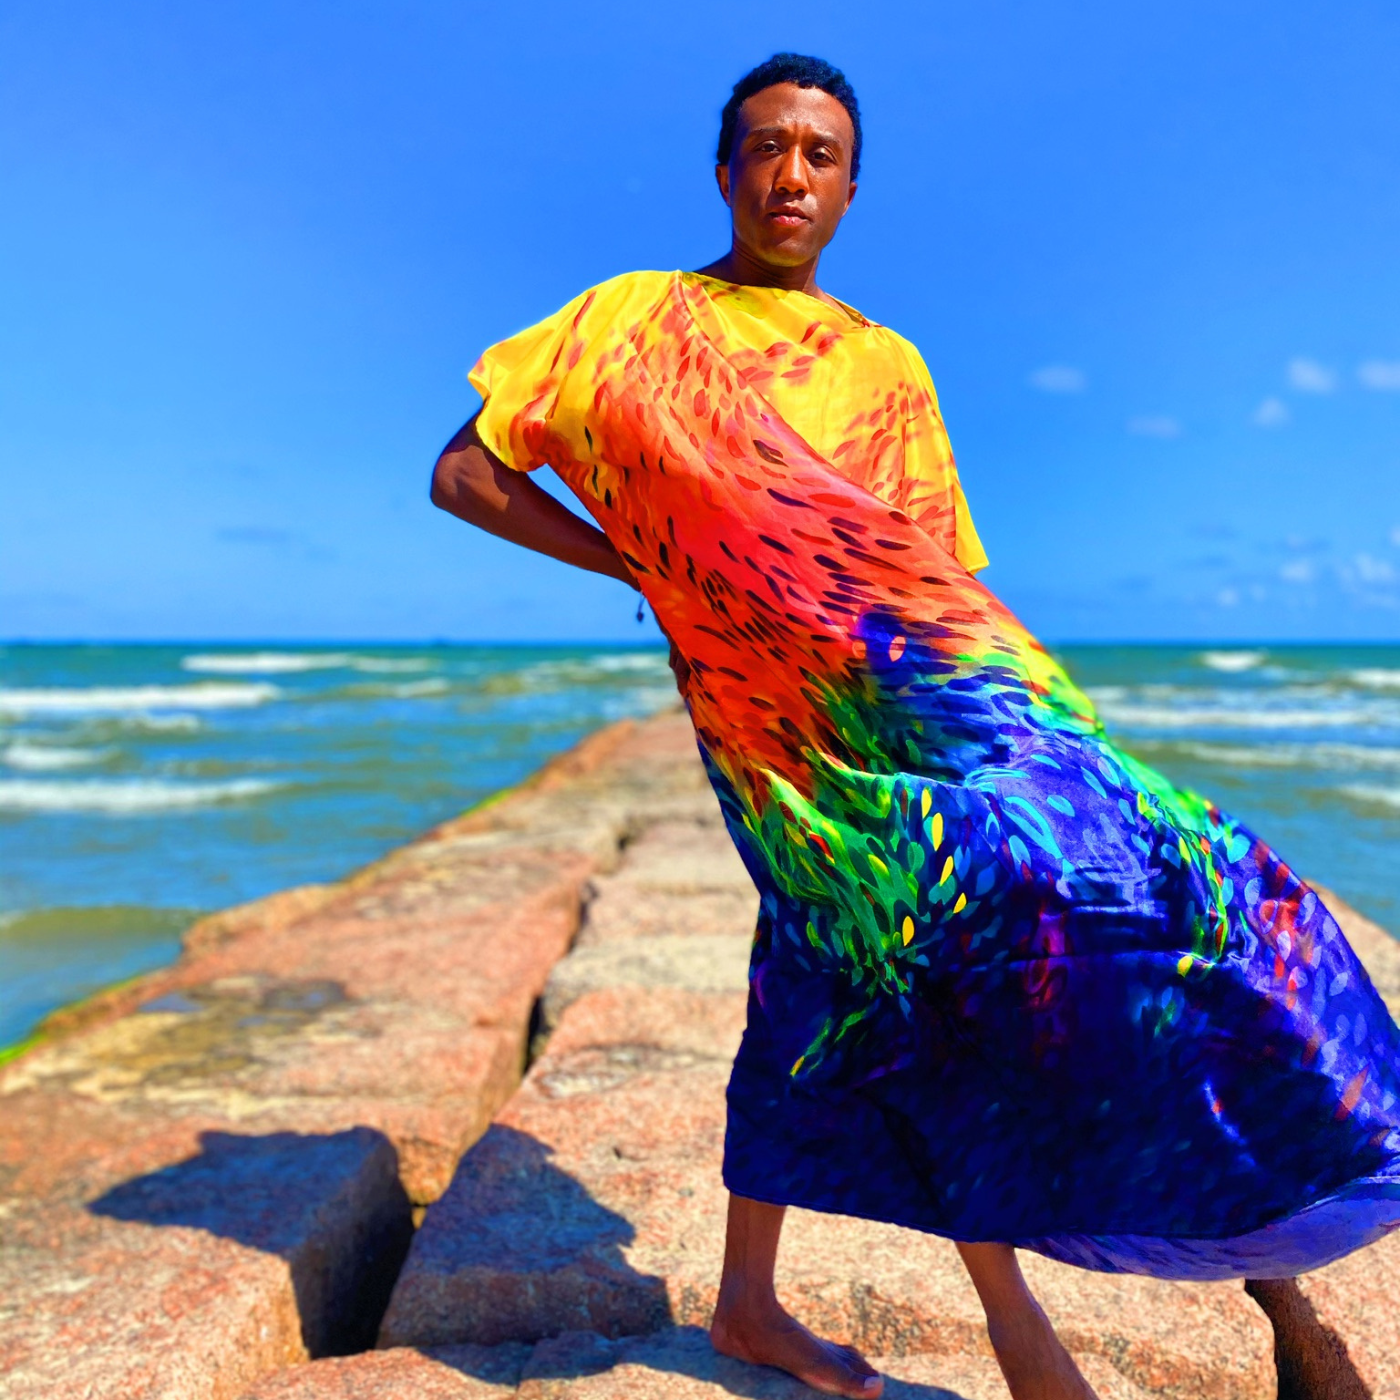 Terrance stands on a beach and looking at the camera, the ocean is behind him. He is wearing a yellow, red, green and blue caftan that is blowing in the wind to the right. His right hand is at his hip.